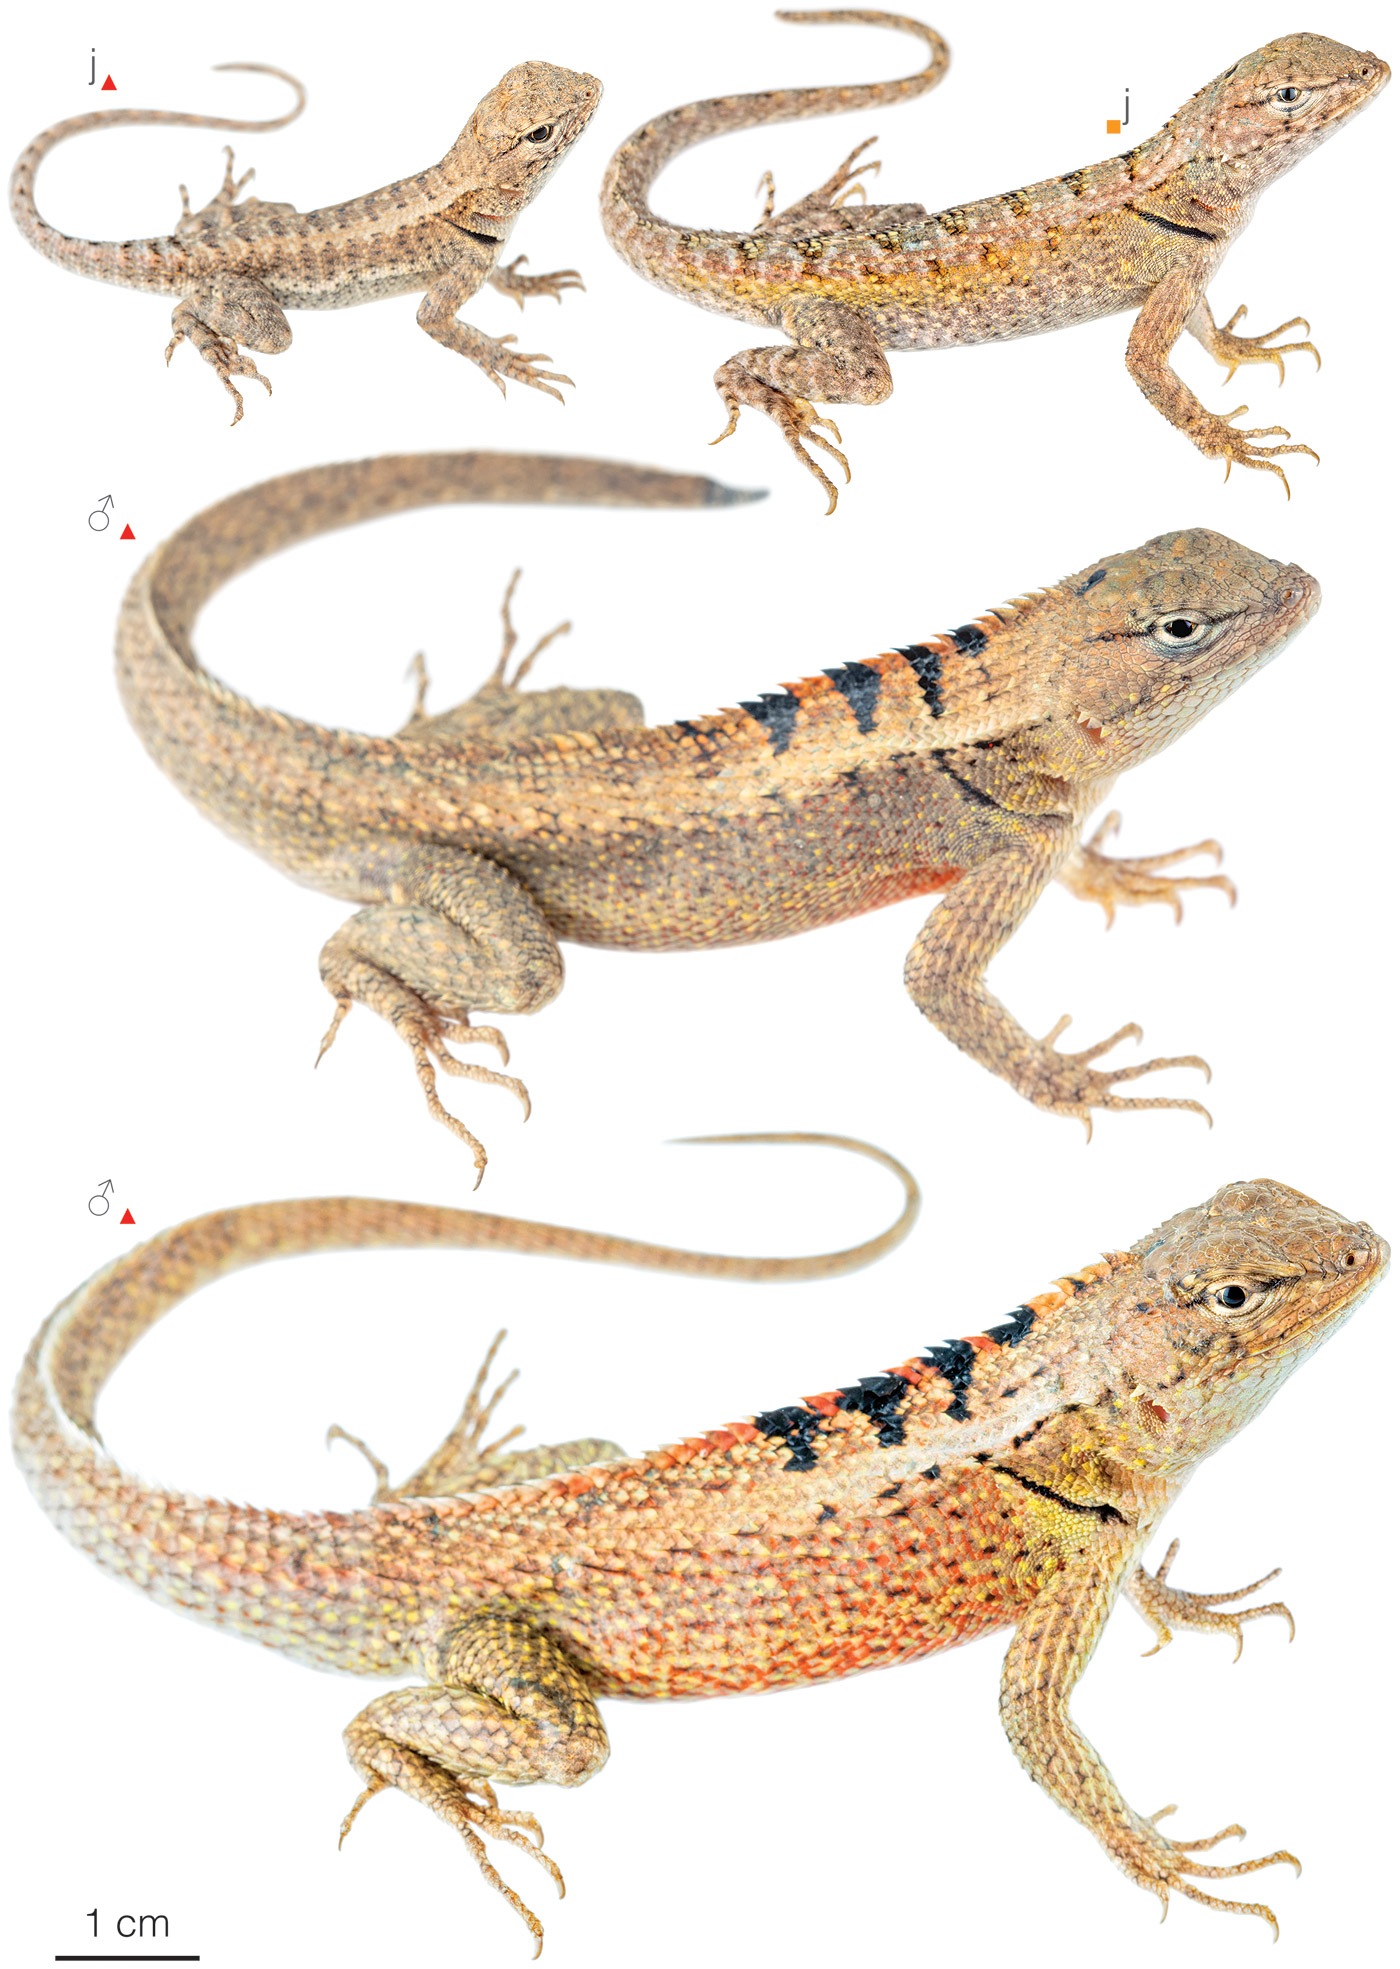 Figure showing variation among individuals of Microlophus occipitalis